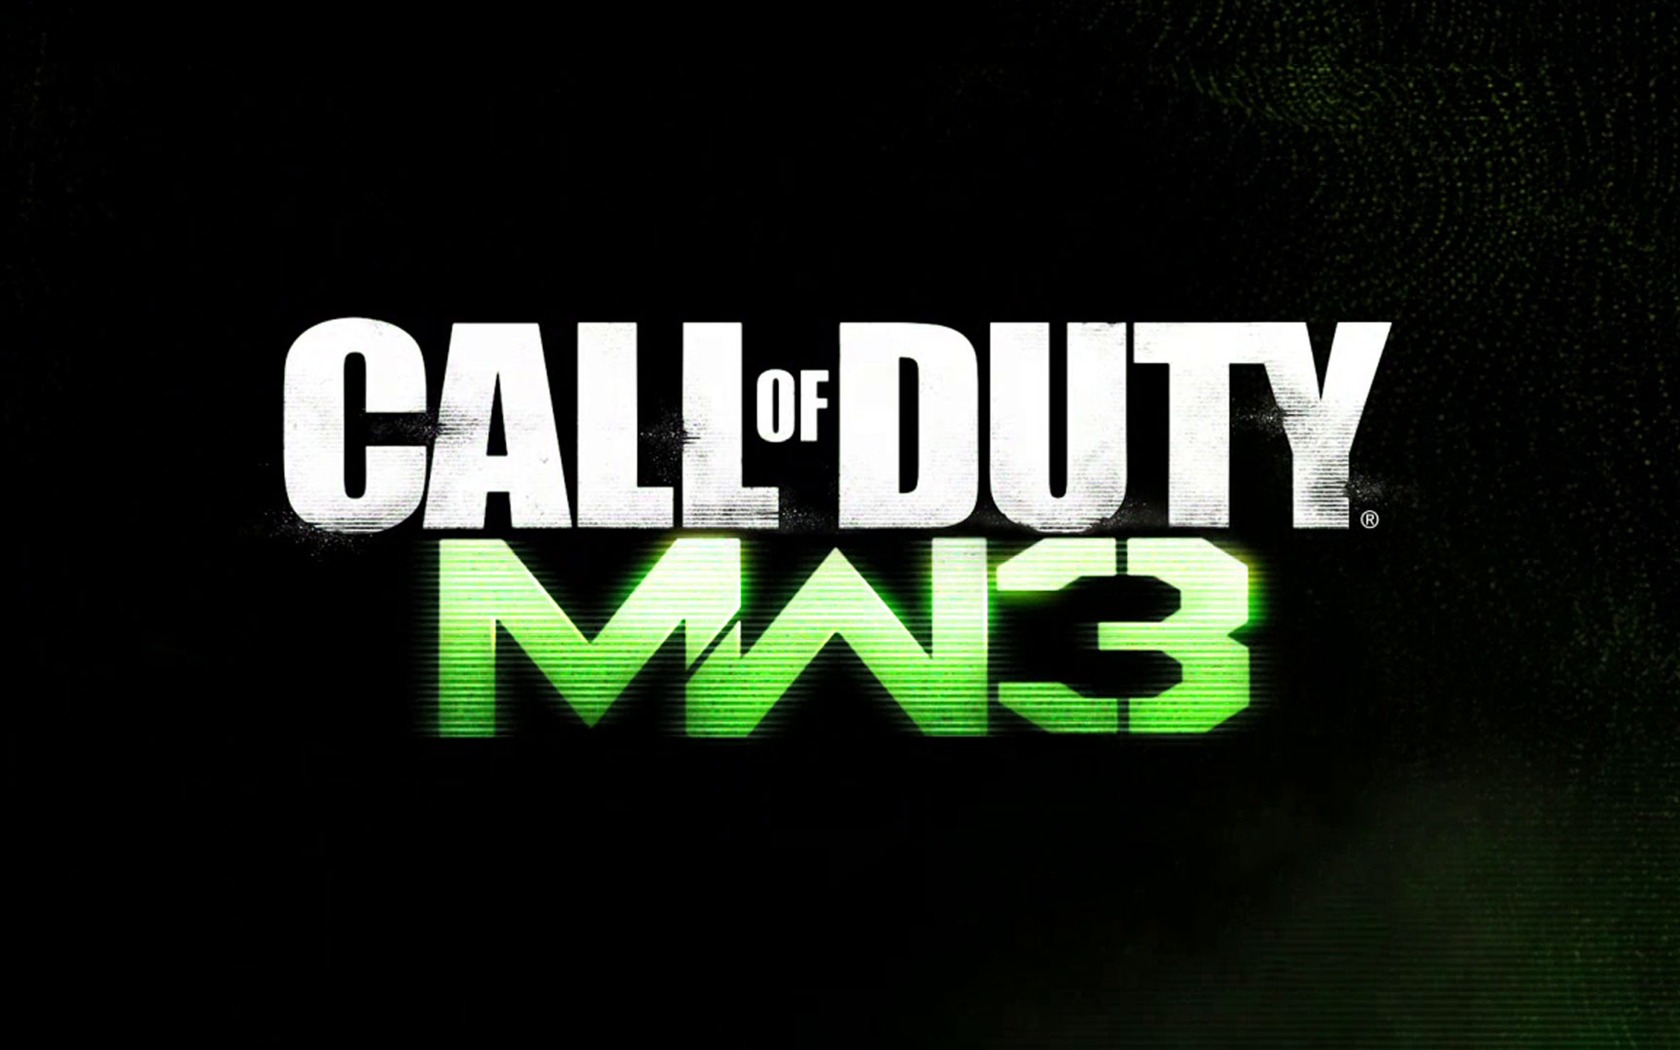 Call of Duty: MW3 HD wallpapers #9 - 1680x1050